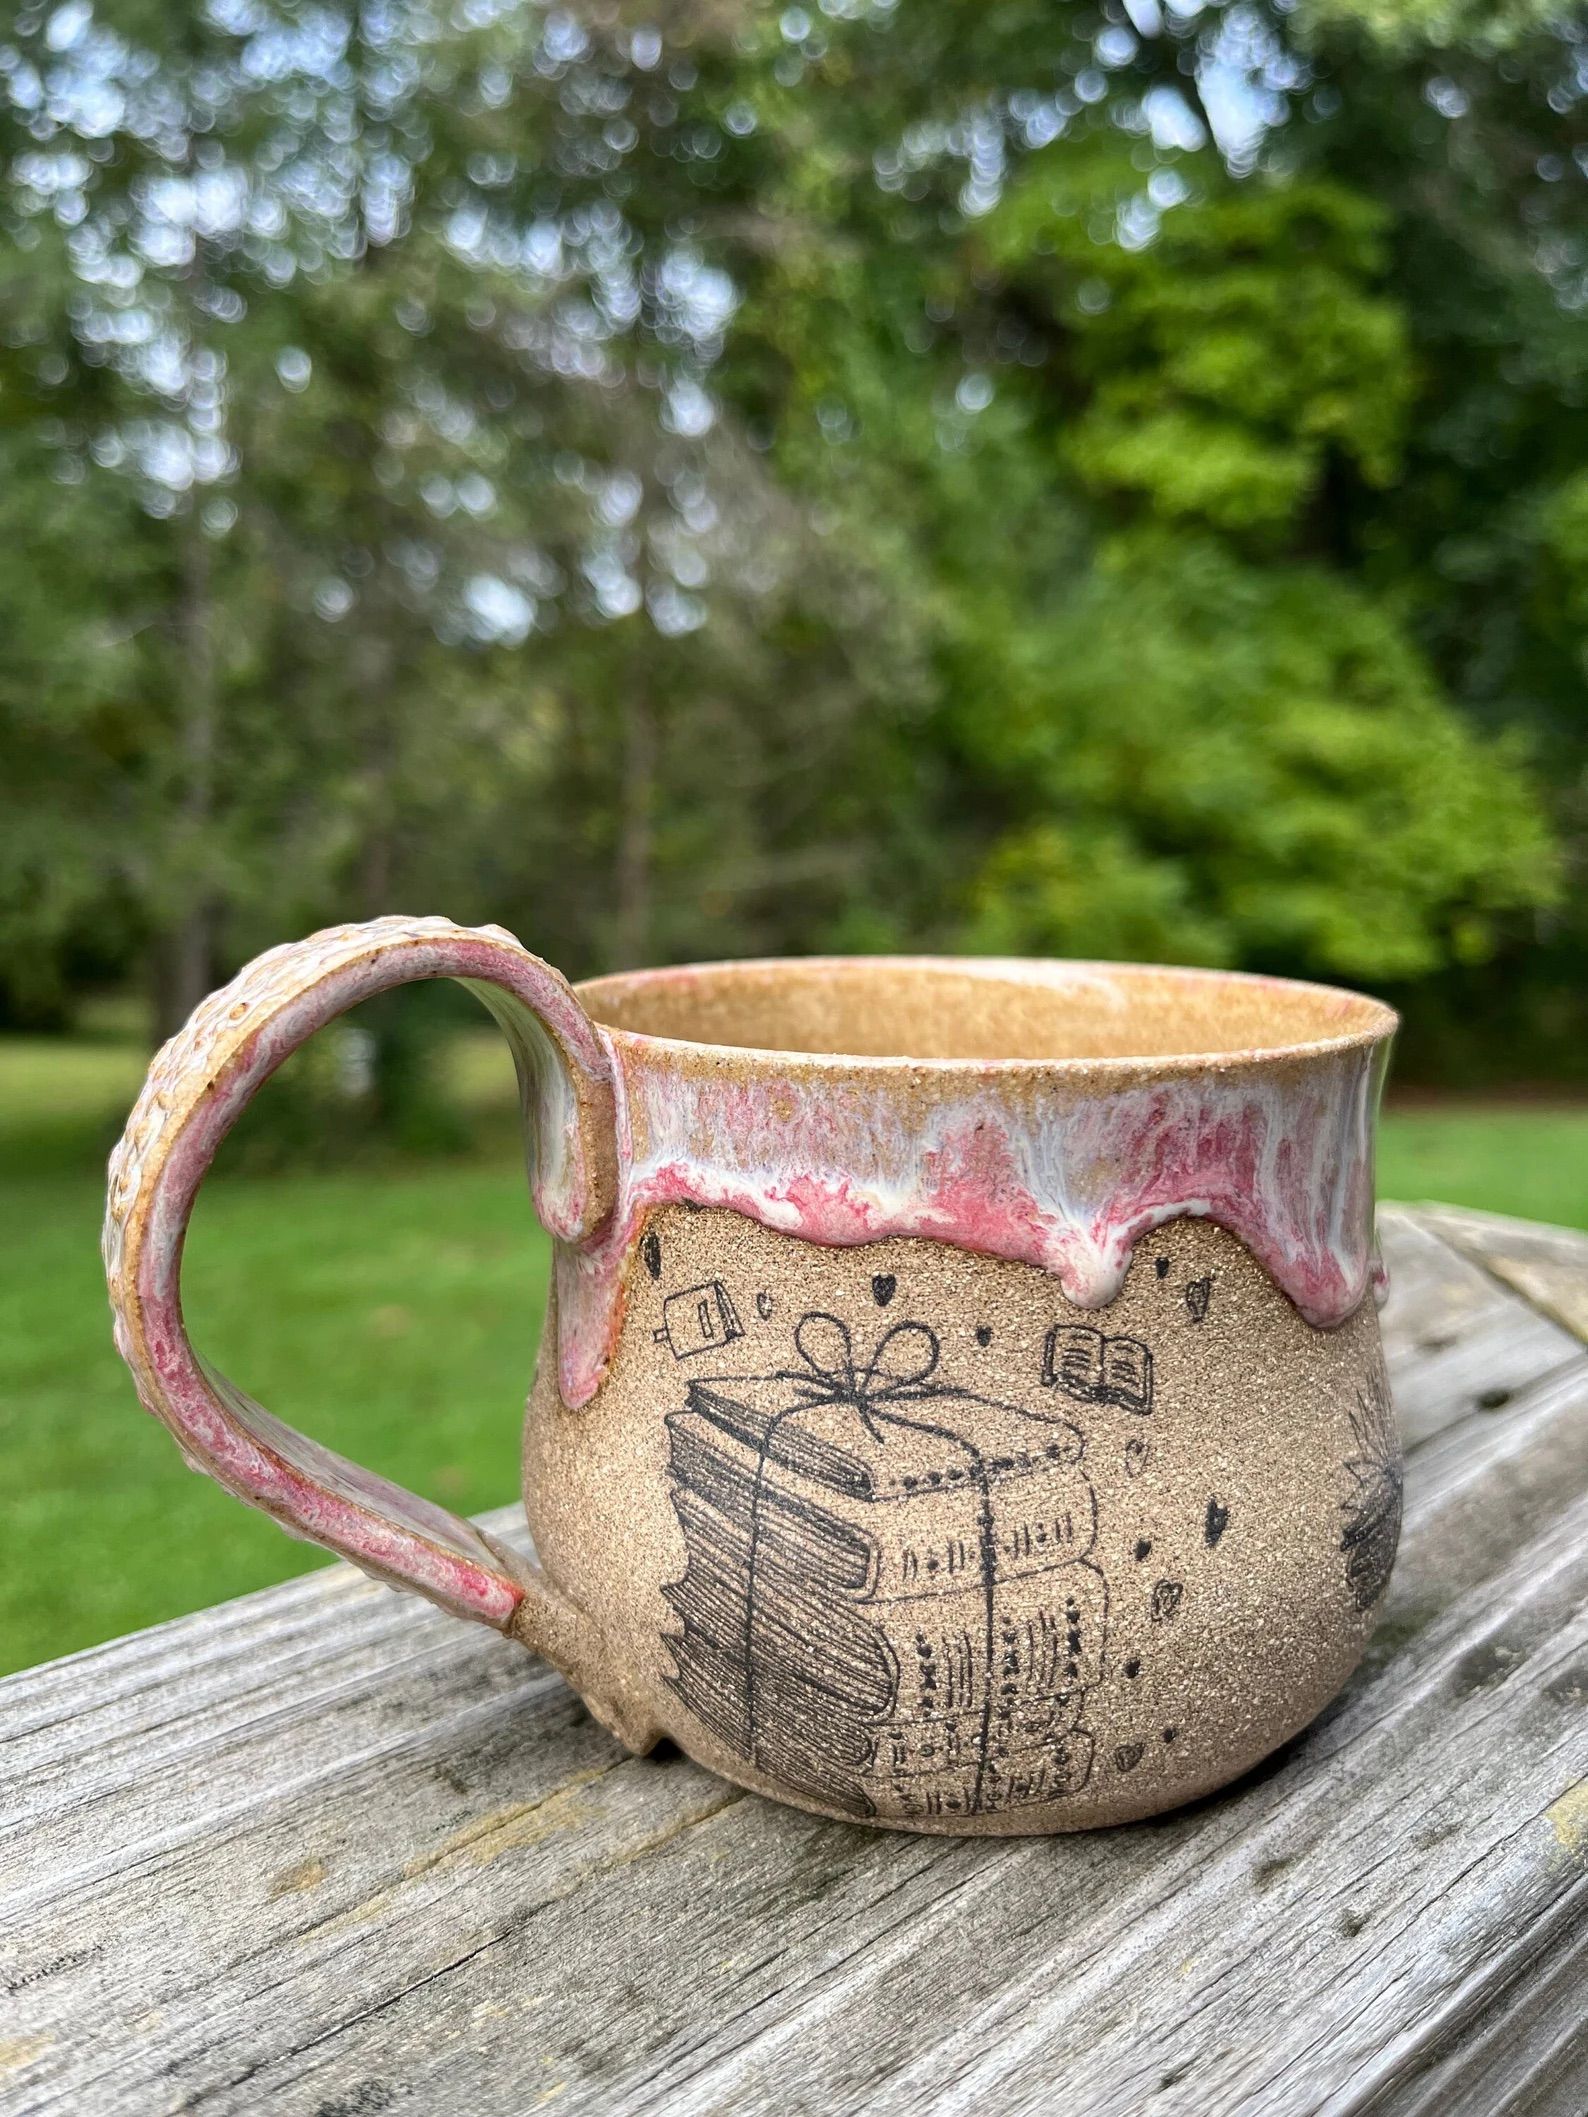 A ceramic mug with a stack of books on the side is on a table outside in the woods. 